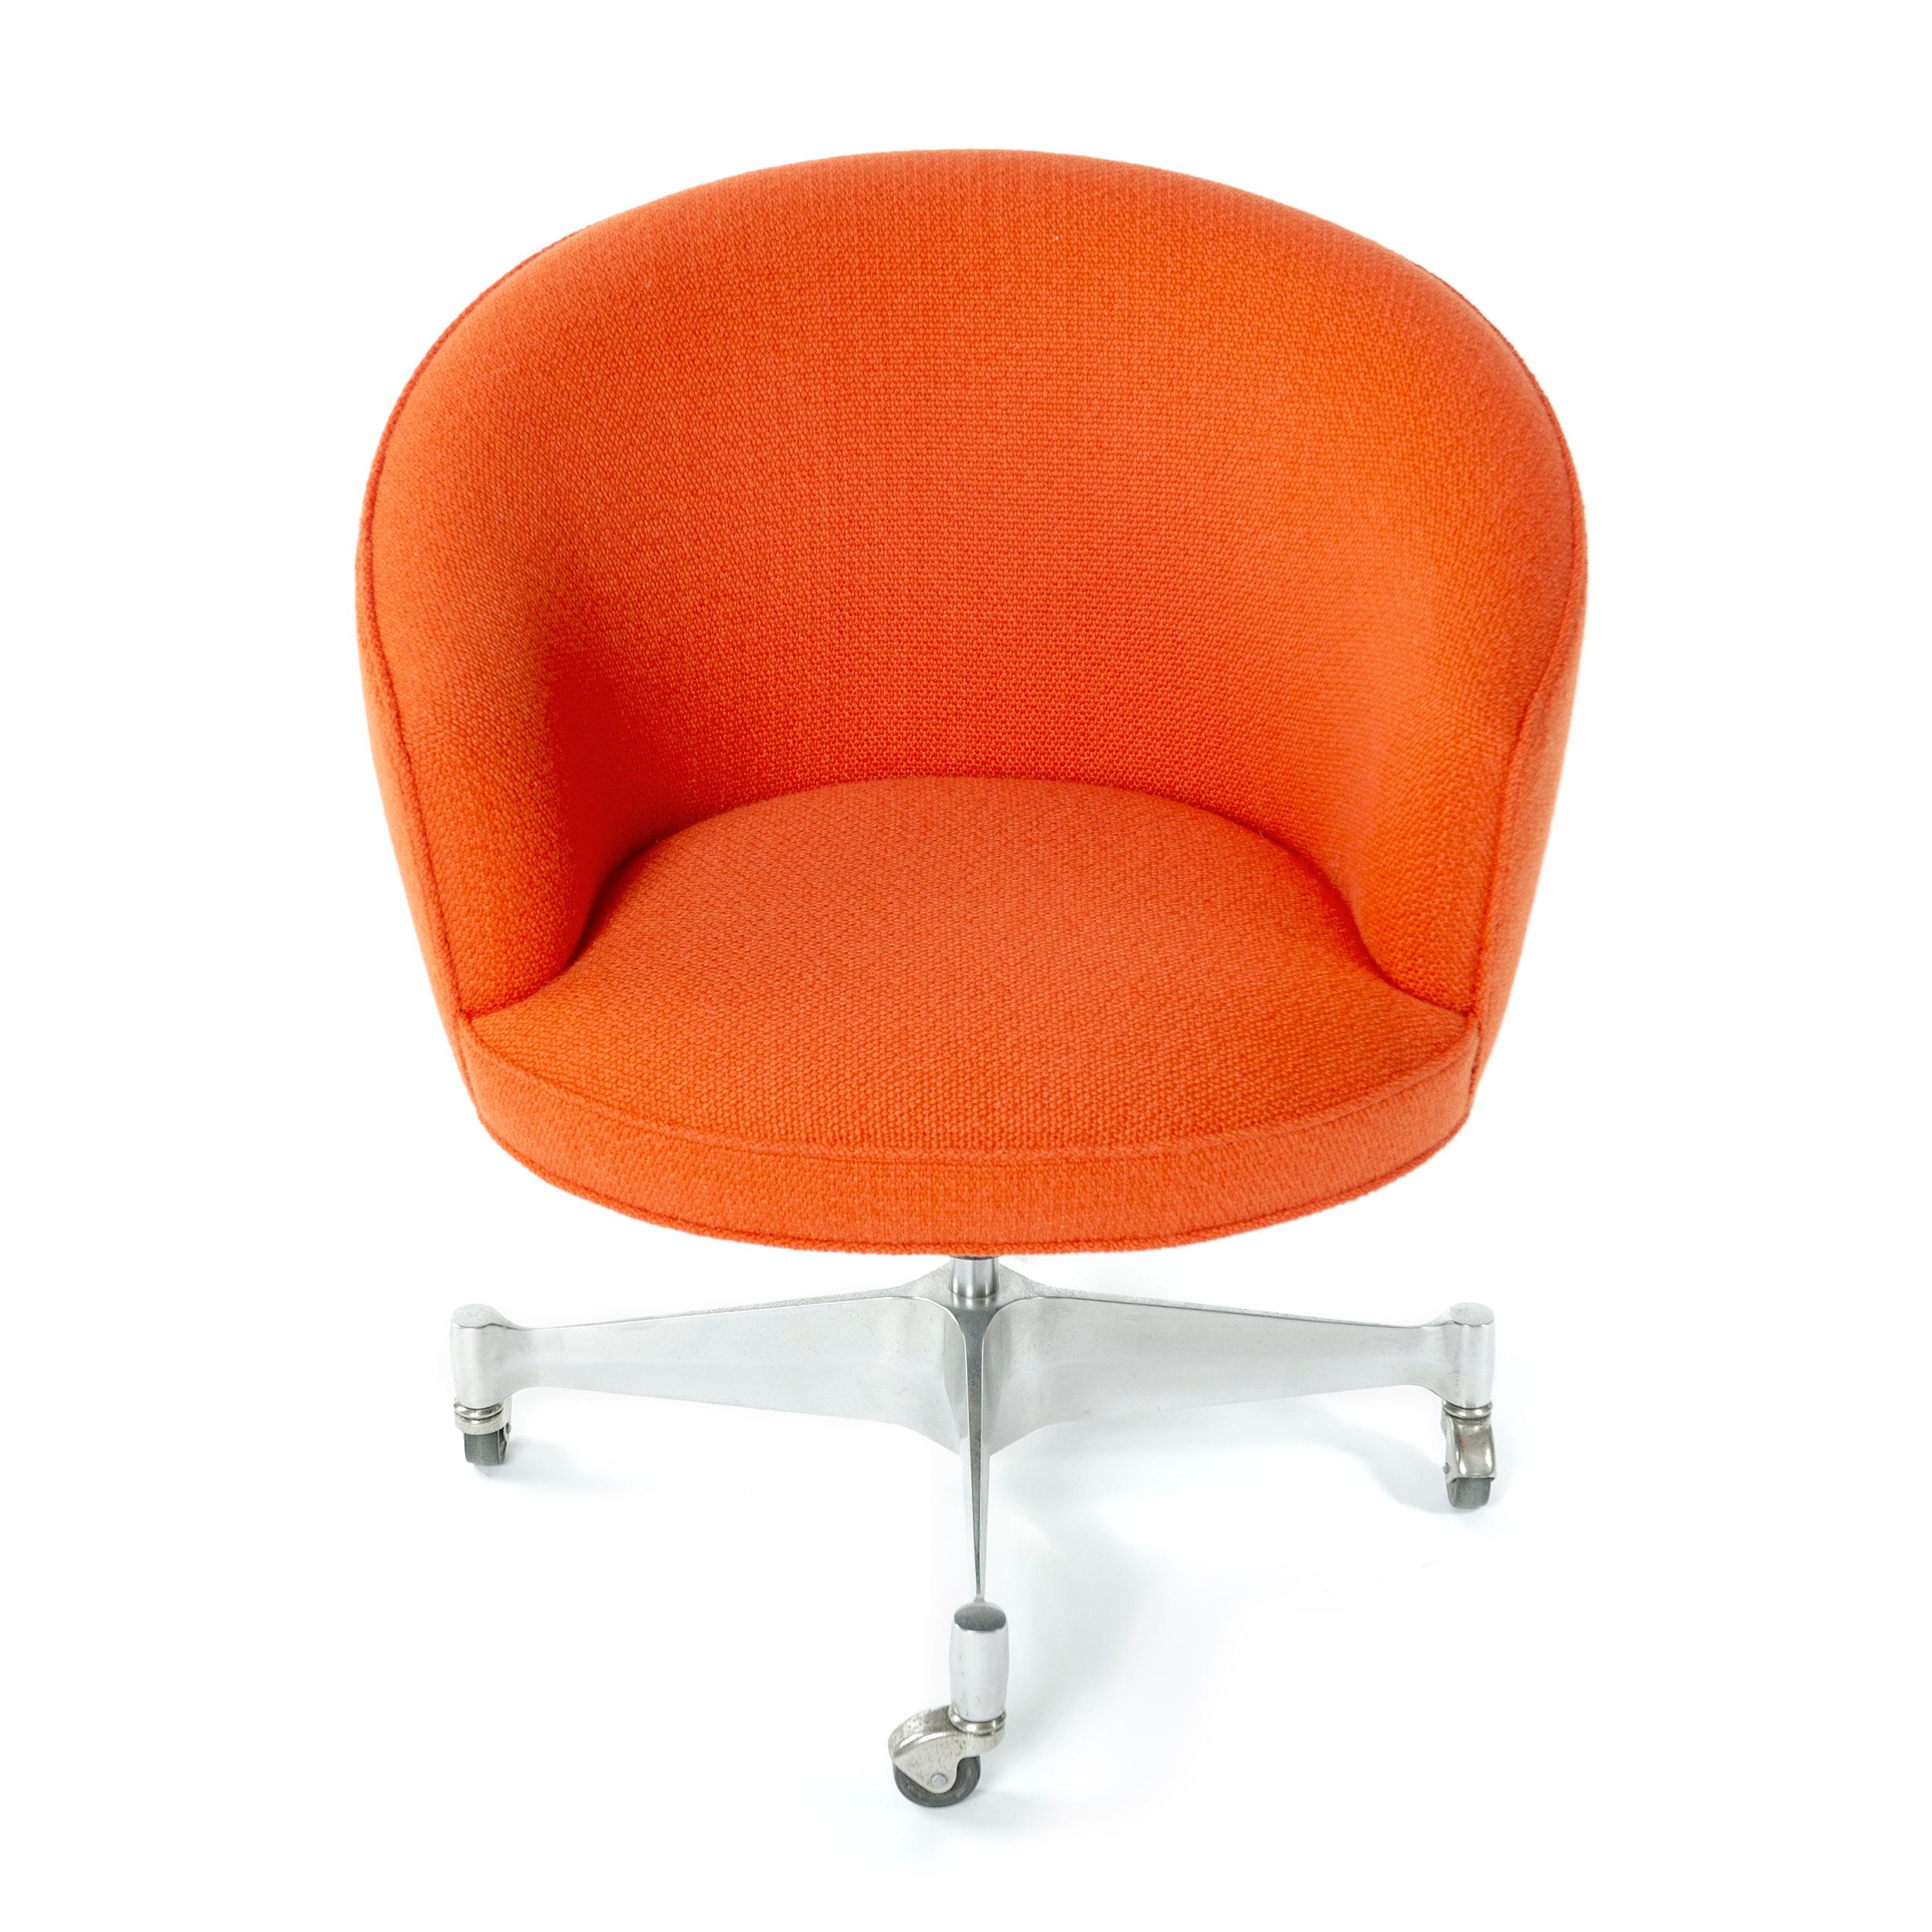 A George Nelson designed rolling desk chair with orange fabric supported by a swivel base with casters. Manufactured by George Nelson and Associates in the 1960s. Newly reupholstered.